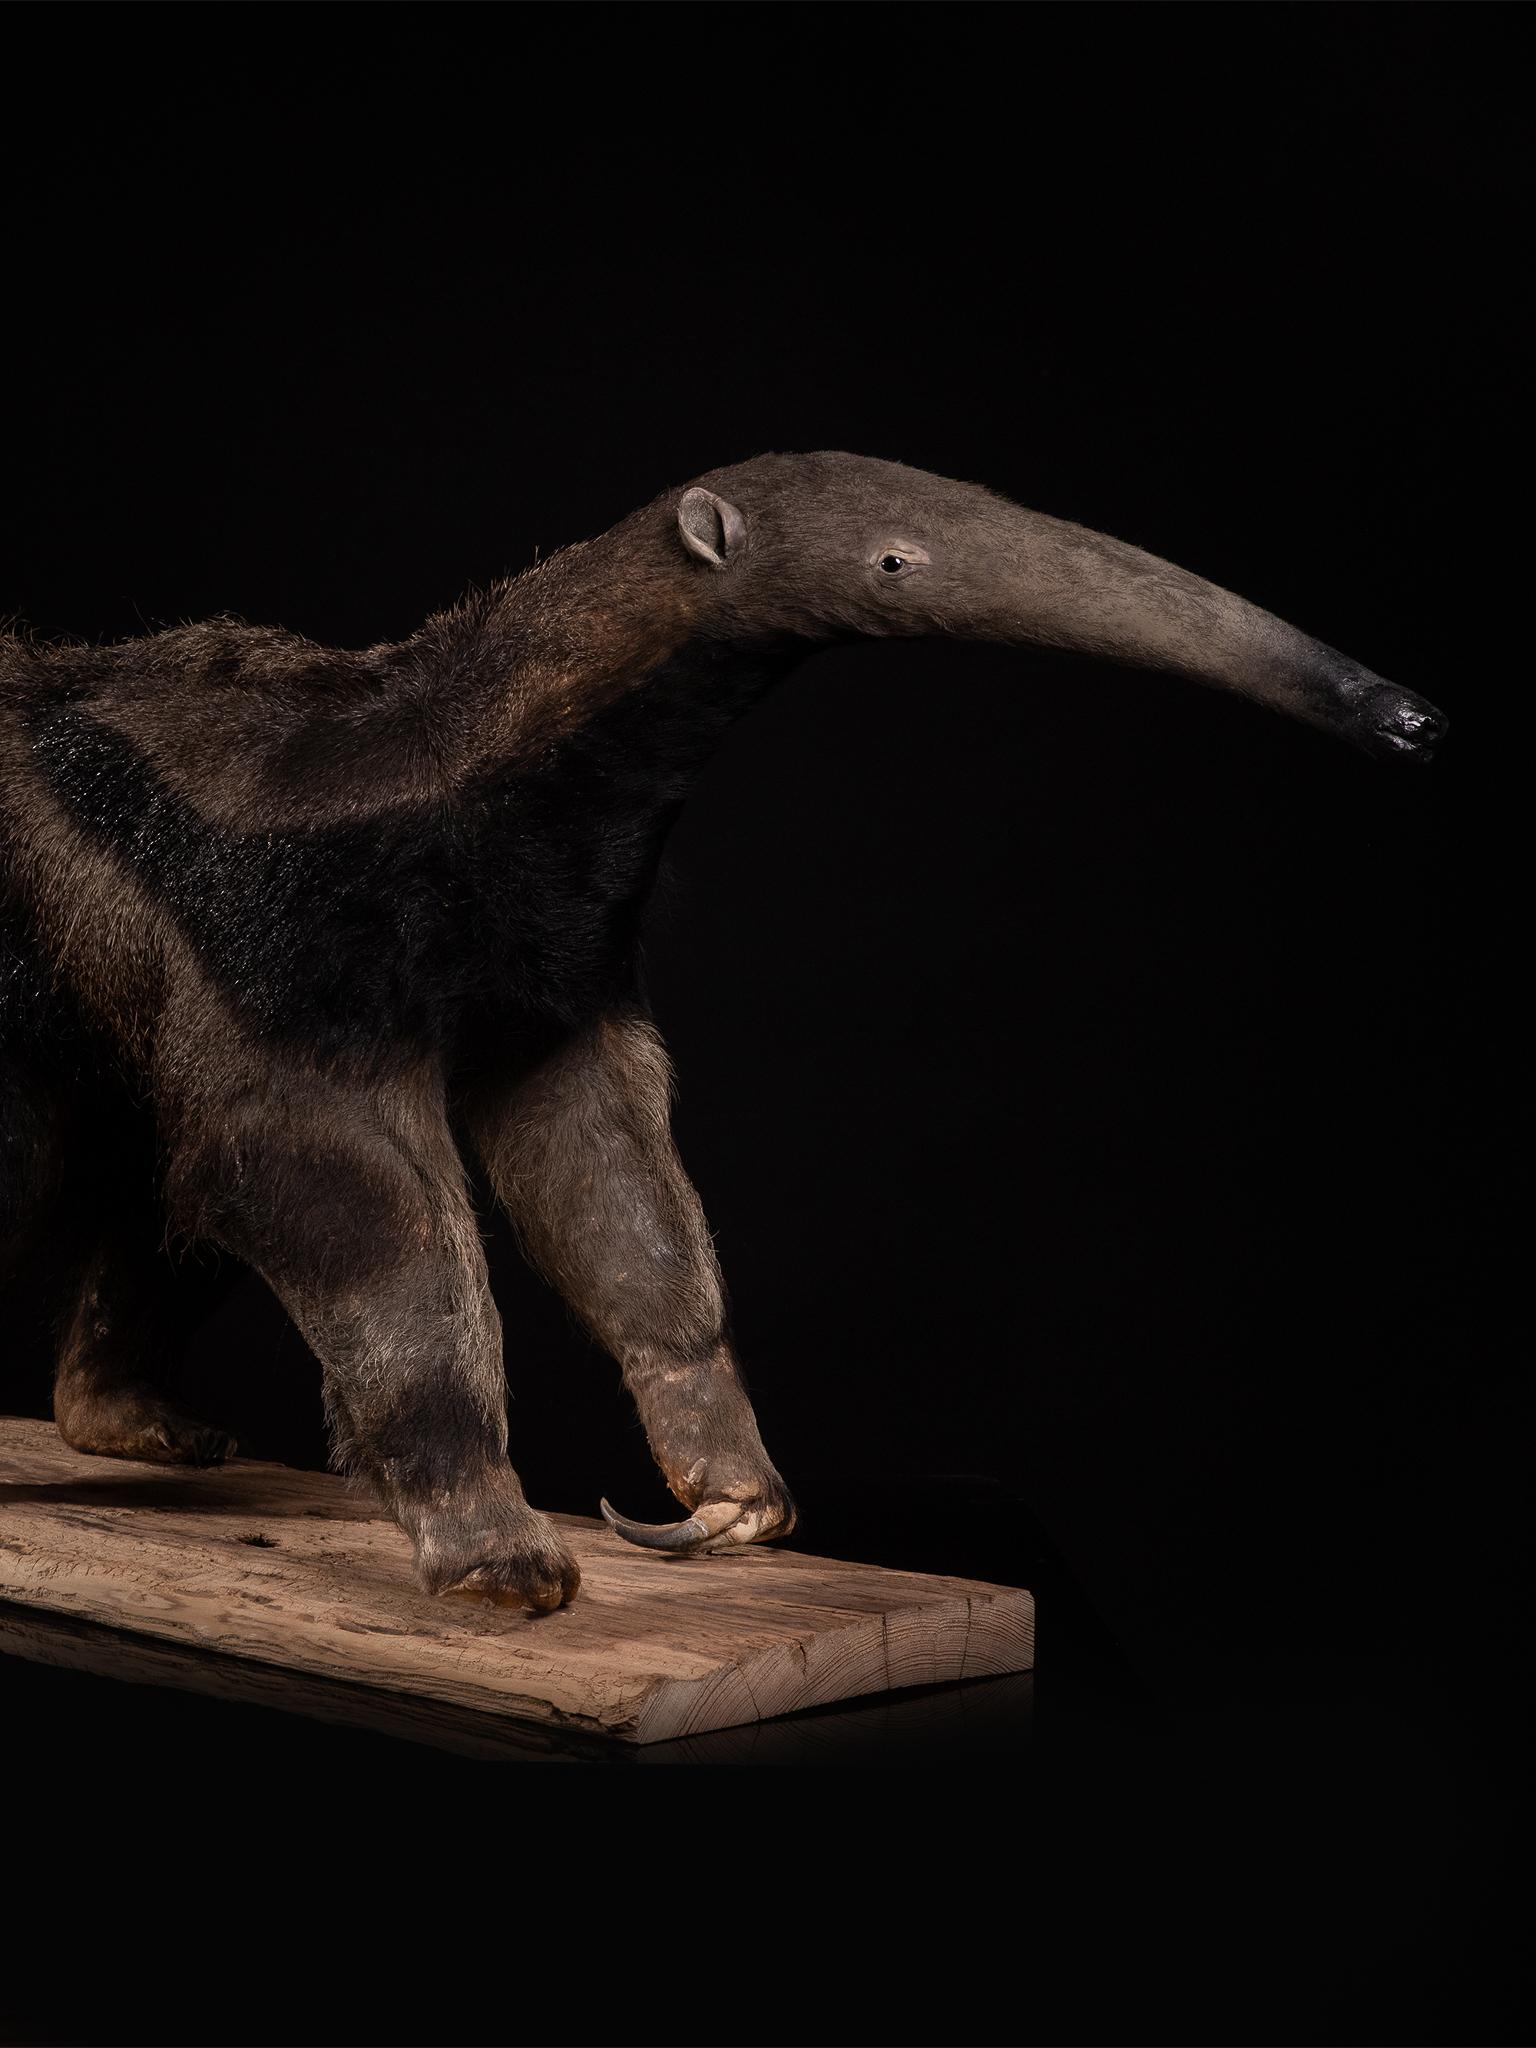 anteater for sale